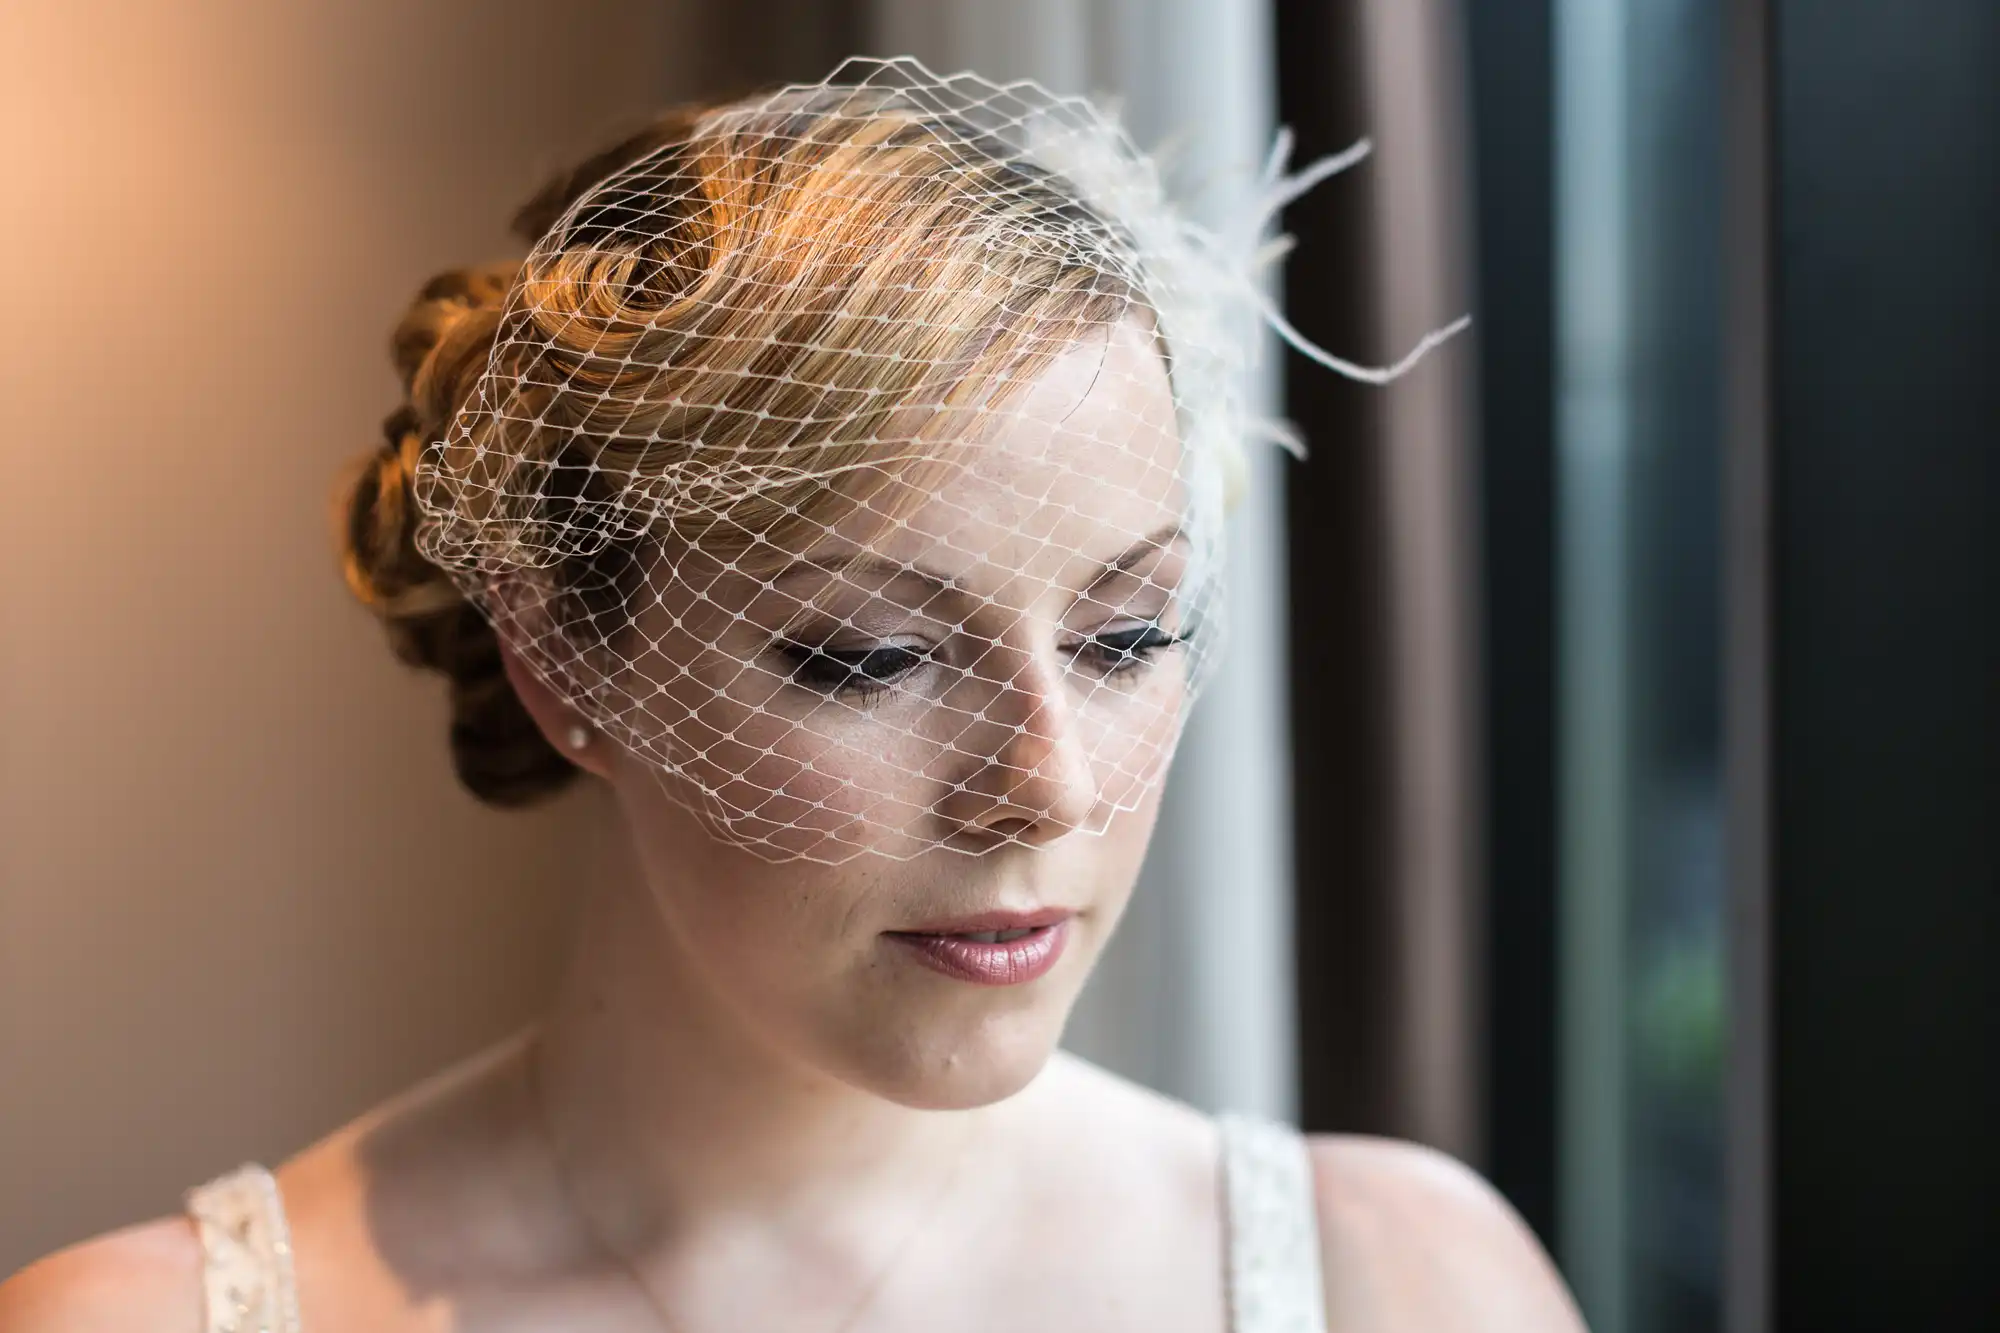 A bride in a white dress and birdcage veil gazes out a window, natural light illuminating her thoughtful expression.